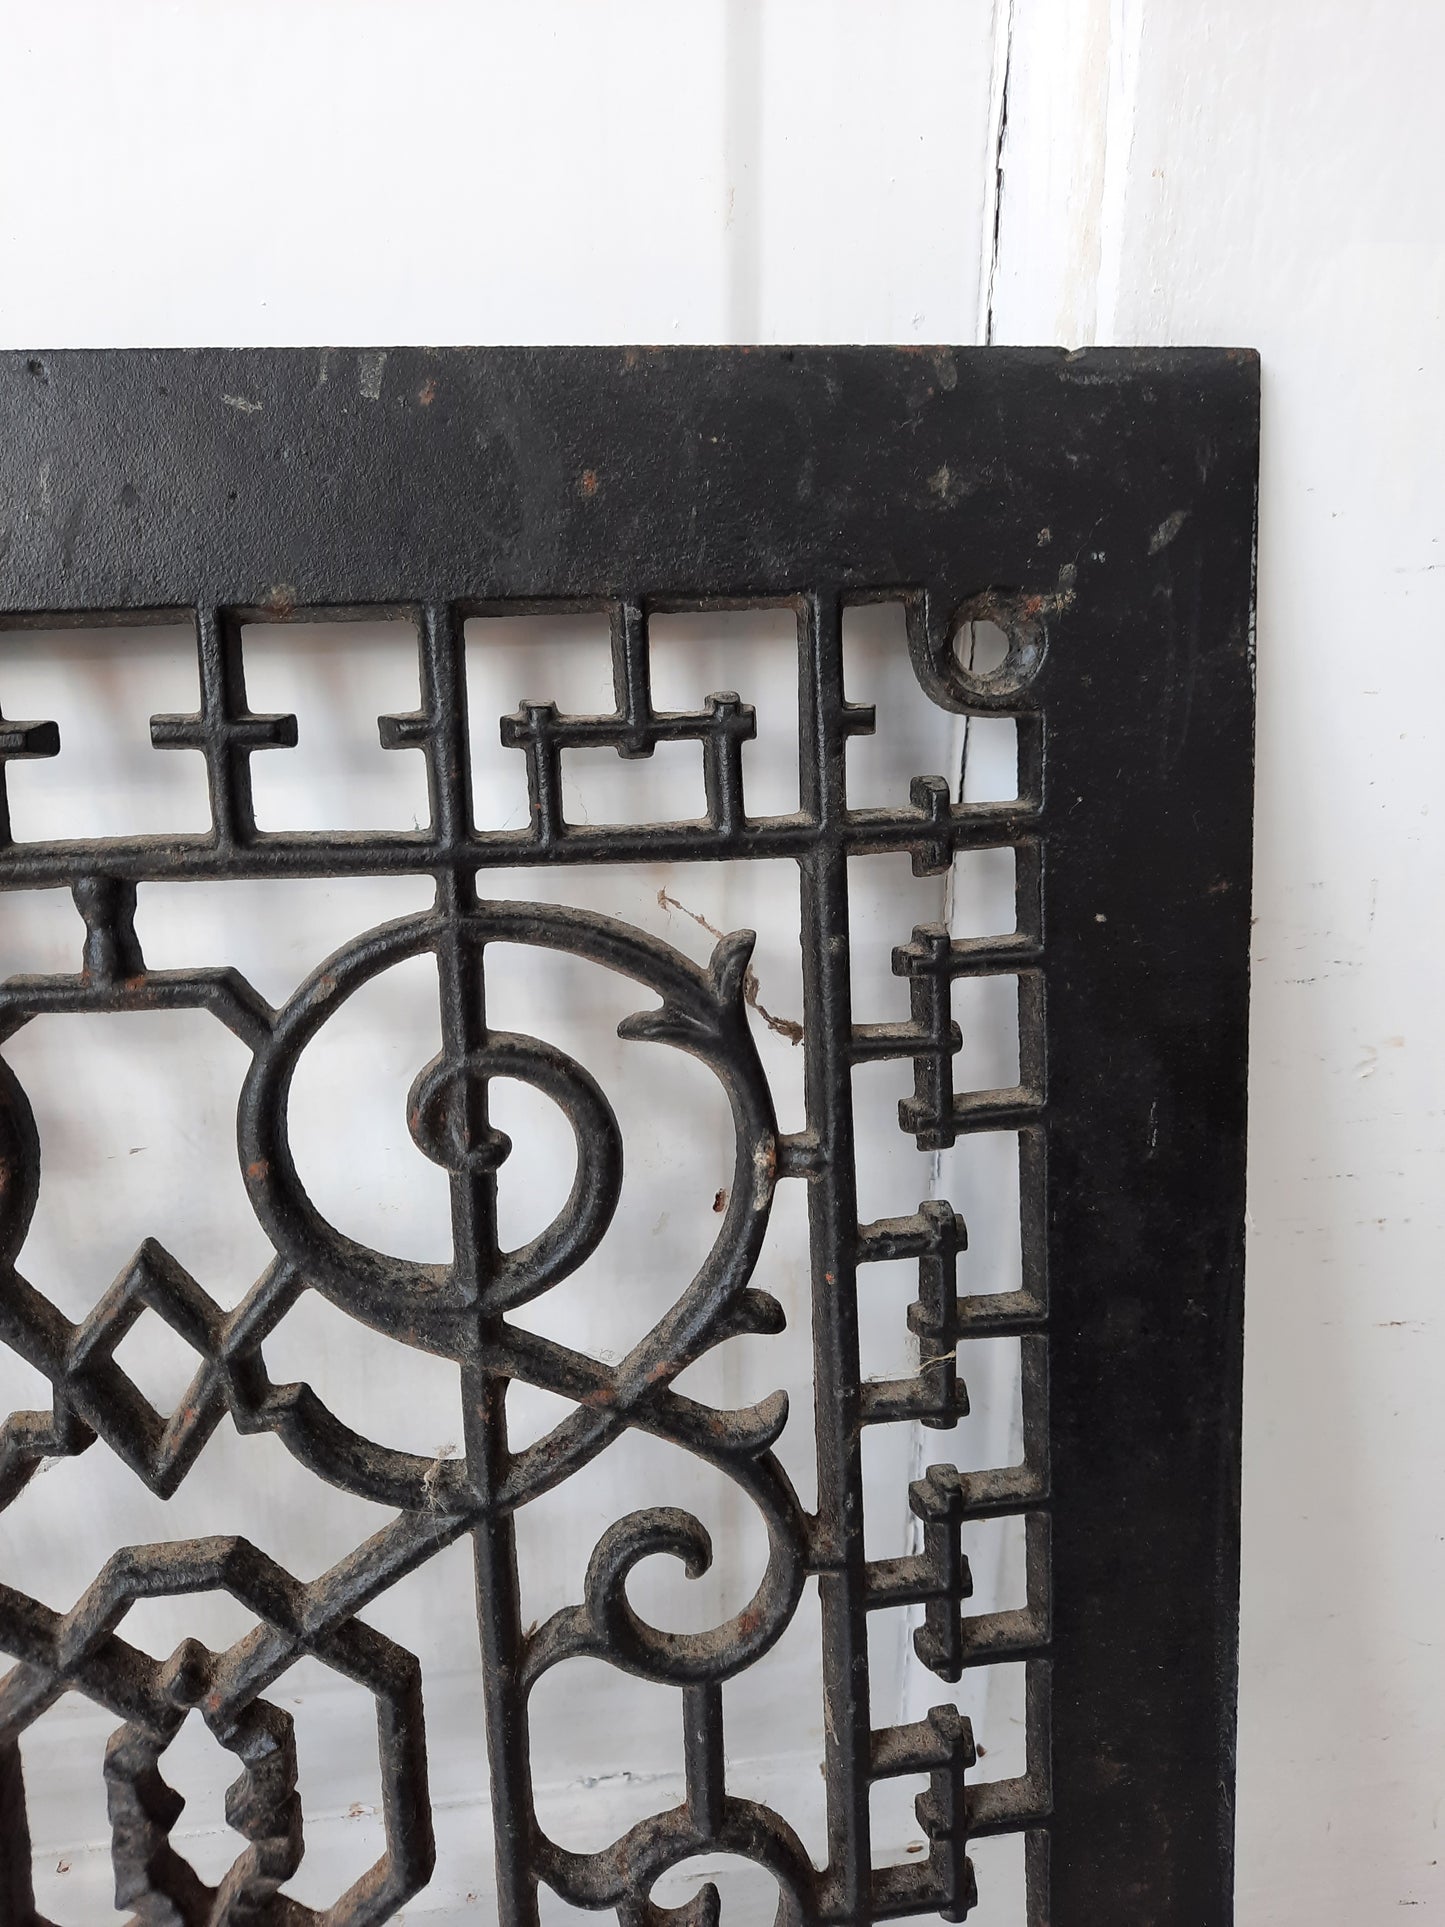 11 x 14 Antique Cast Iron Vent Cover, Floor or Wall Mount Heat Register Grate #111603